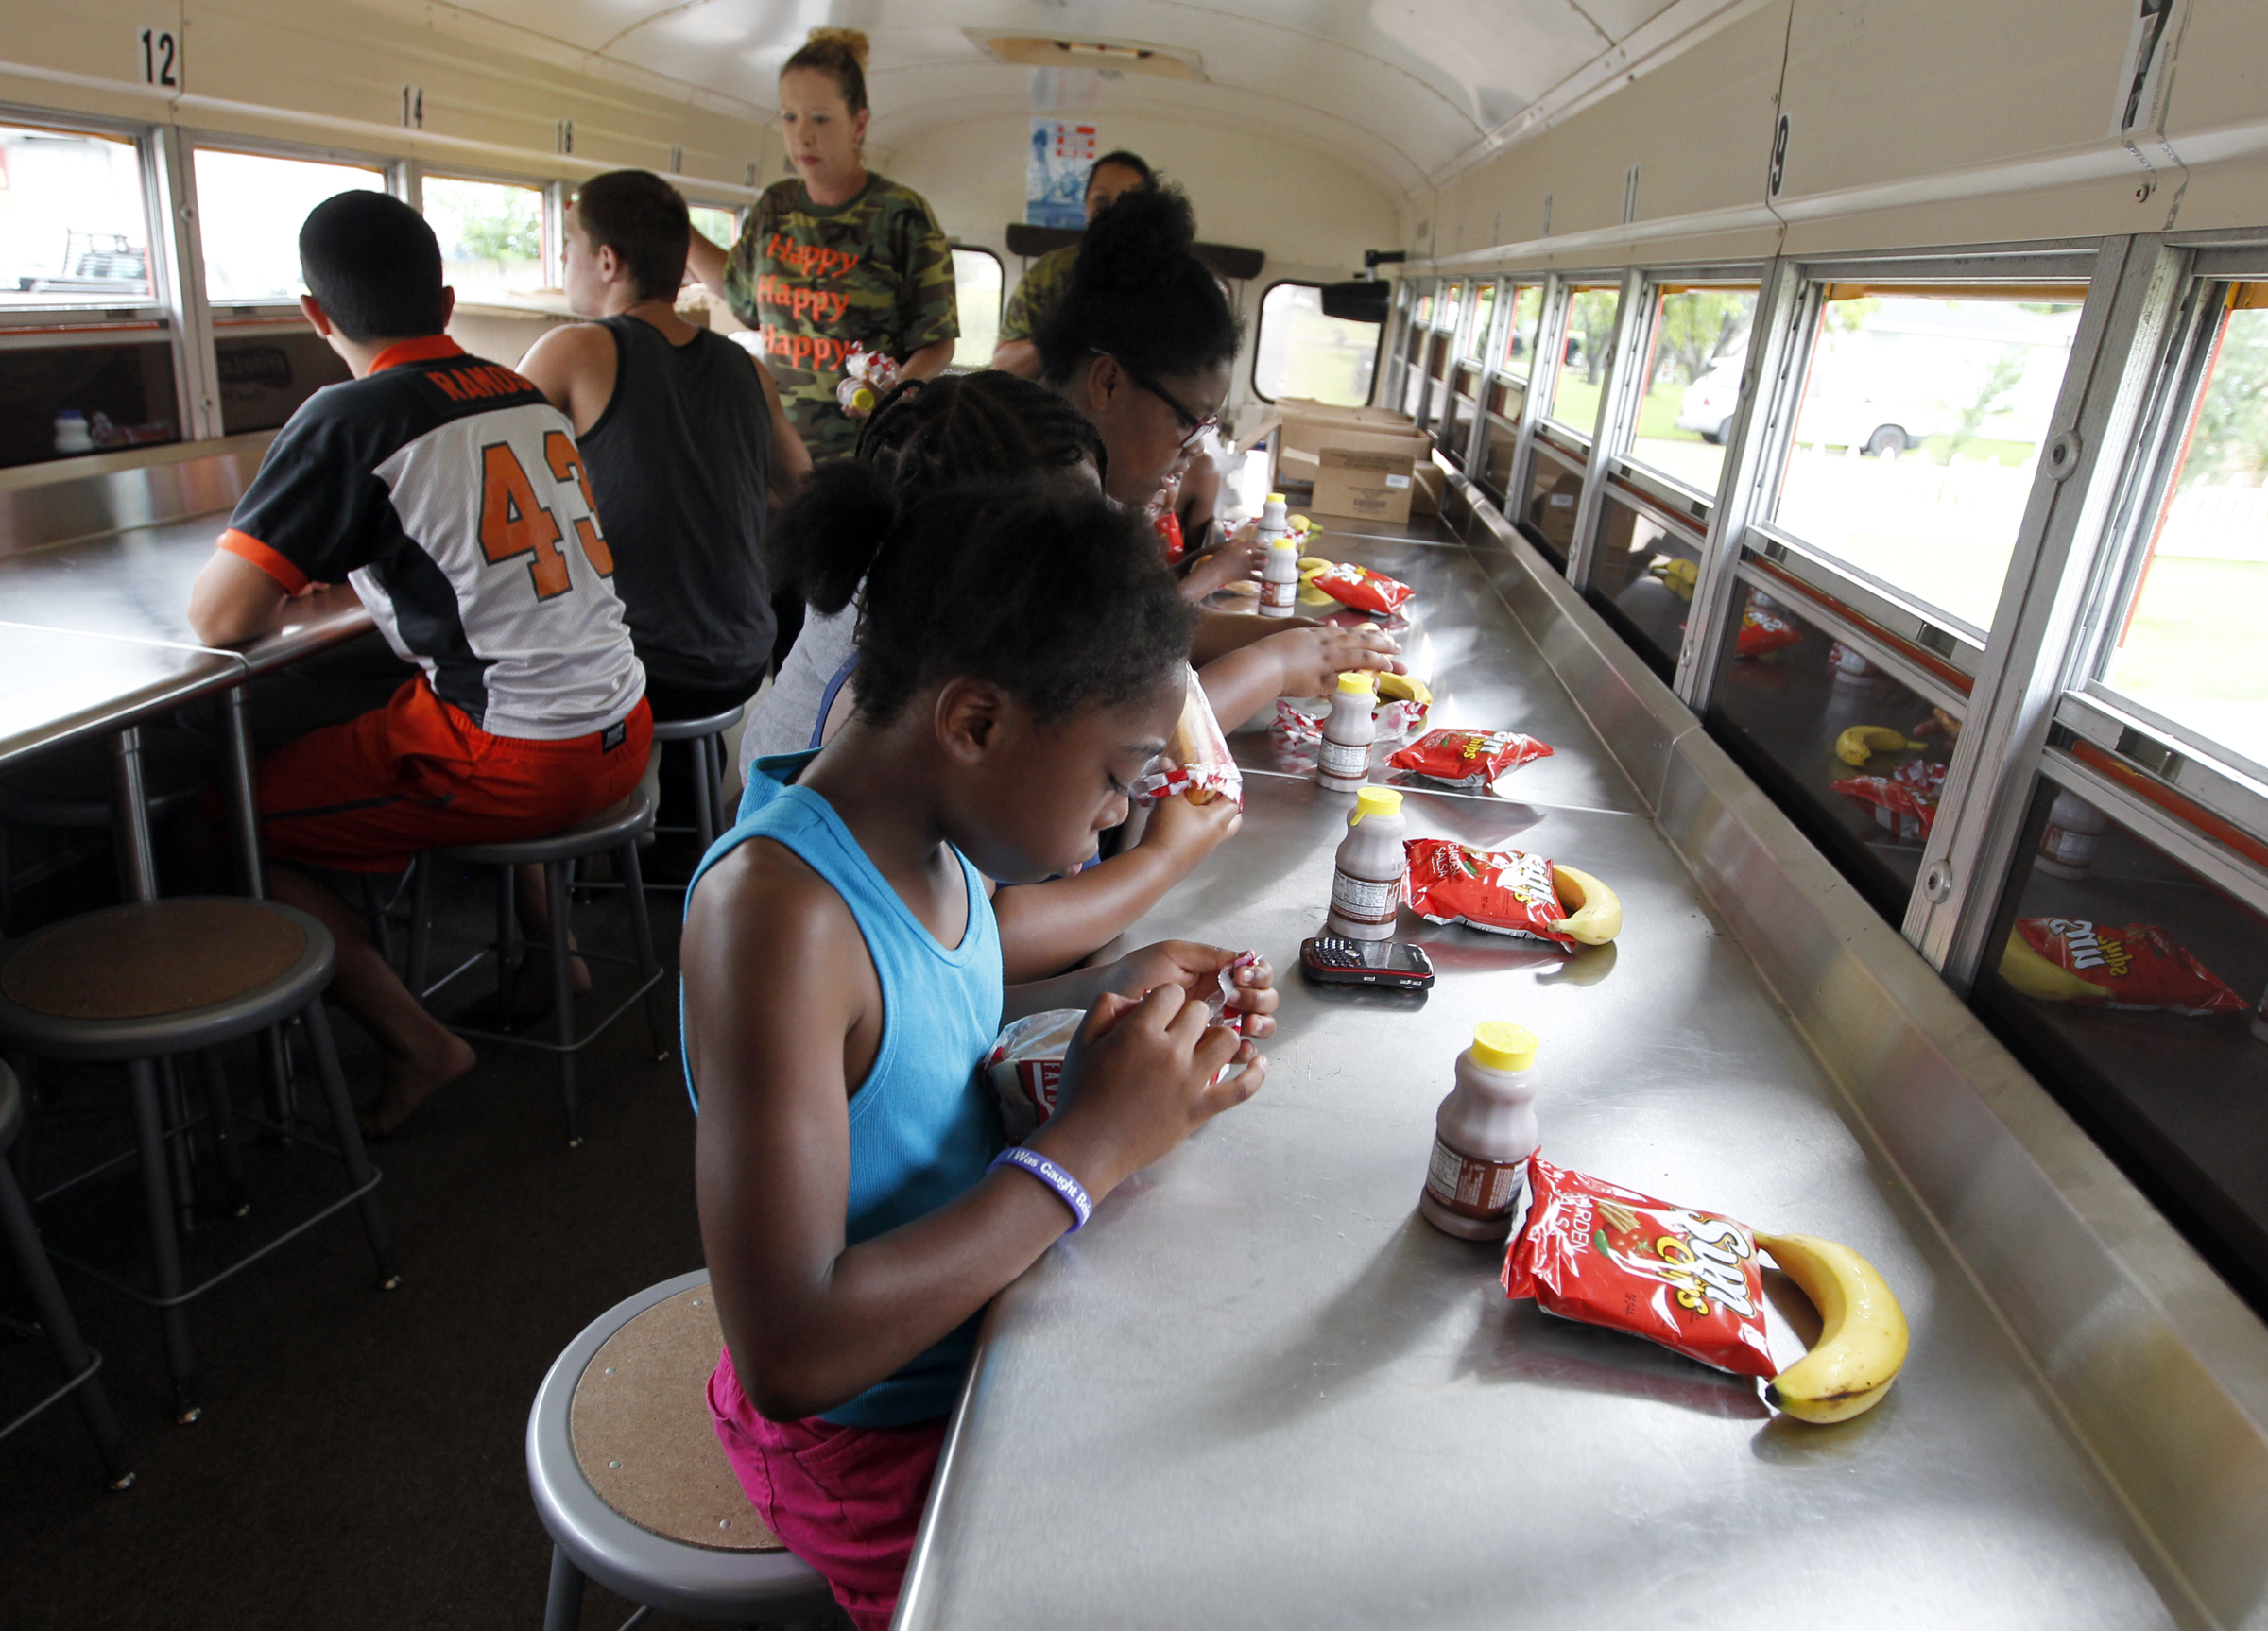 Aiyanna Wyatt, Tia'Kria Walker and Khadijan Wyatt have lunch on Texas City school district Nutrition Services' Sting Mobile during a stop on Thursday July 17, 2014. The school bus, converted to a mobile cafeteria, makes breakfast and lunch stops five days a week. JENNIFER REYNOLDS/The Daily News